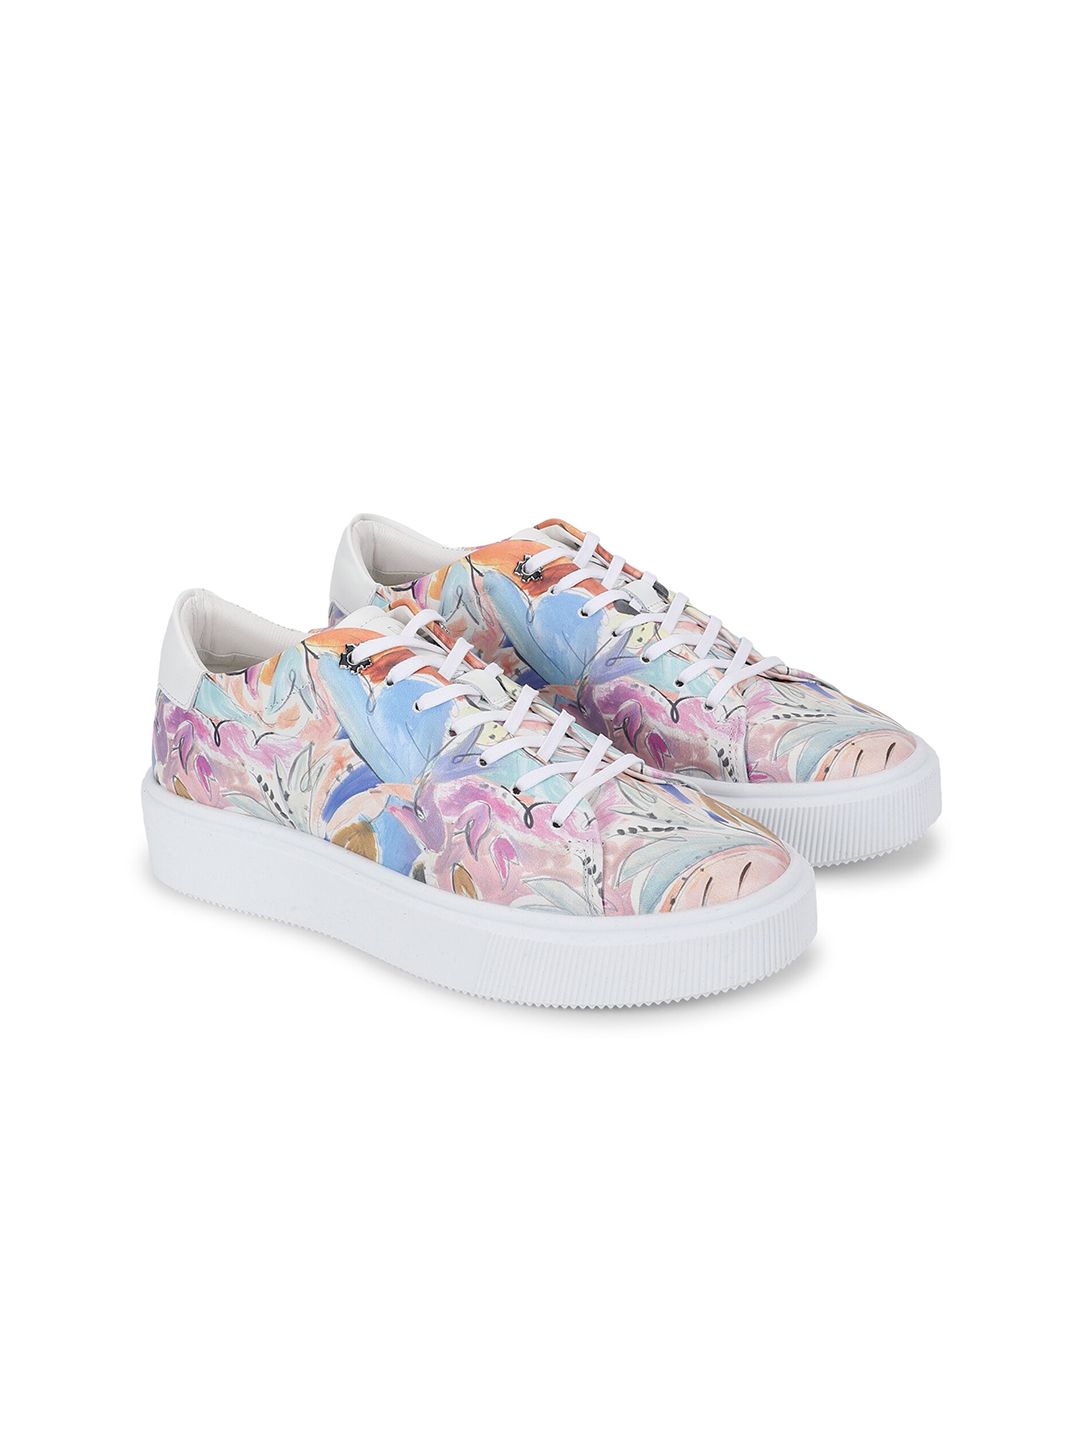 Ted Baker Women Multicoloured Printed Leather Sneakers Price in India